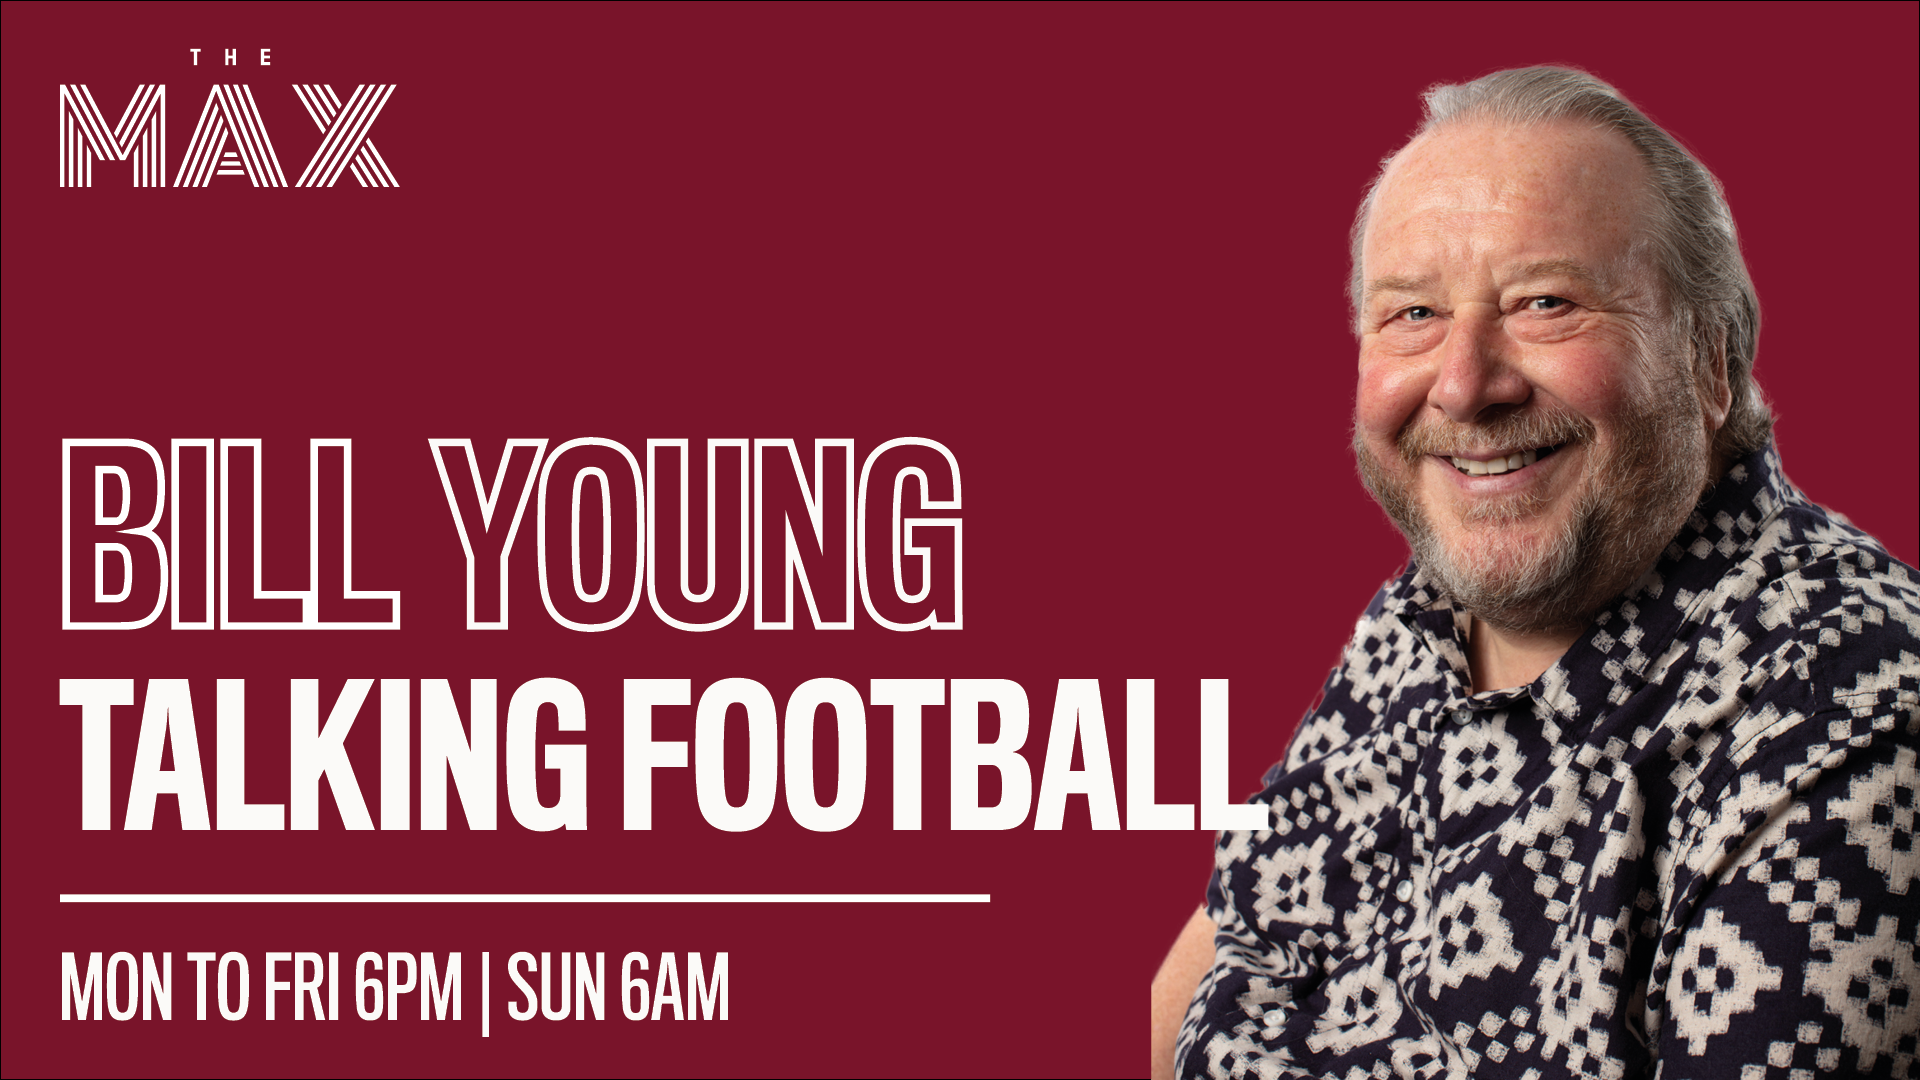 Talking Football with Bill Young - Friday 5th March